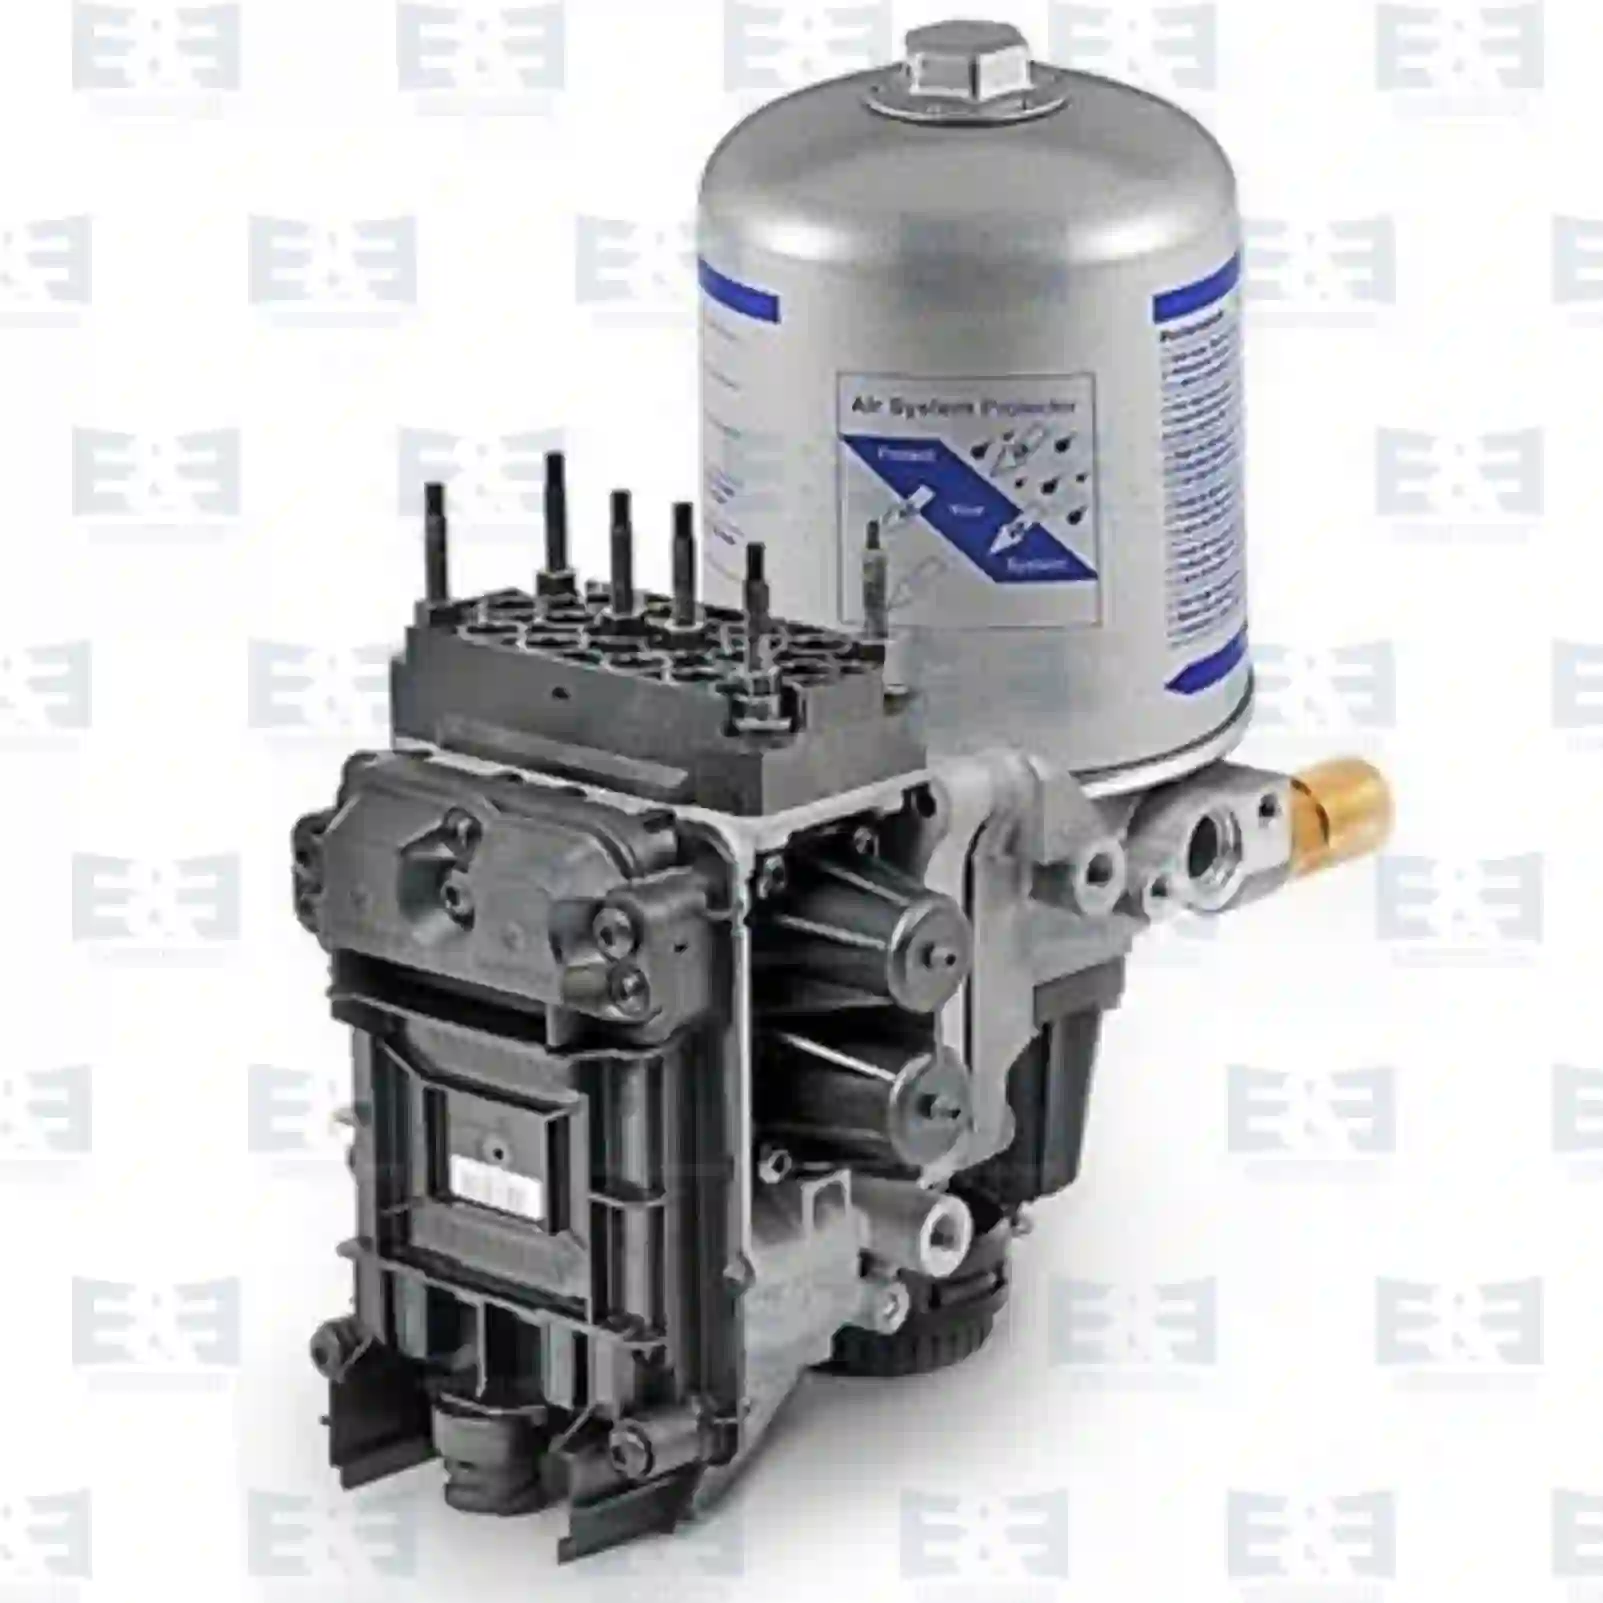 Air Dryer Air dryer, complete with valve, EE No 2E2297182 ,  oem no:1474663, 1535829, 1543224, 1738295, 1753577, 1763425, 1770184, 1796161, 1897631, 1928589, 1941953, 2063357, 2089579, 2148069, 2308777, 573715 E&E Truck Spare Parts | Truck Spare Parts, Auotomotive Spare Parts